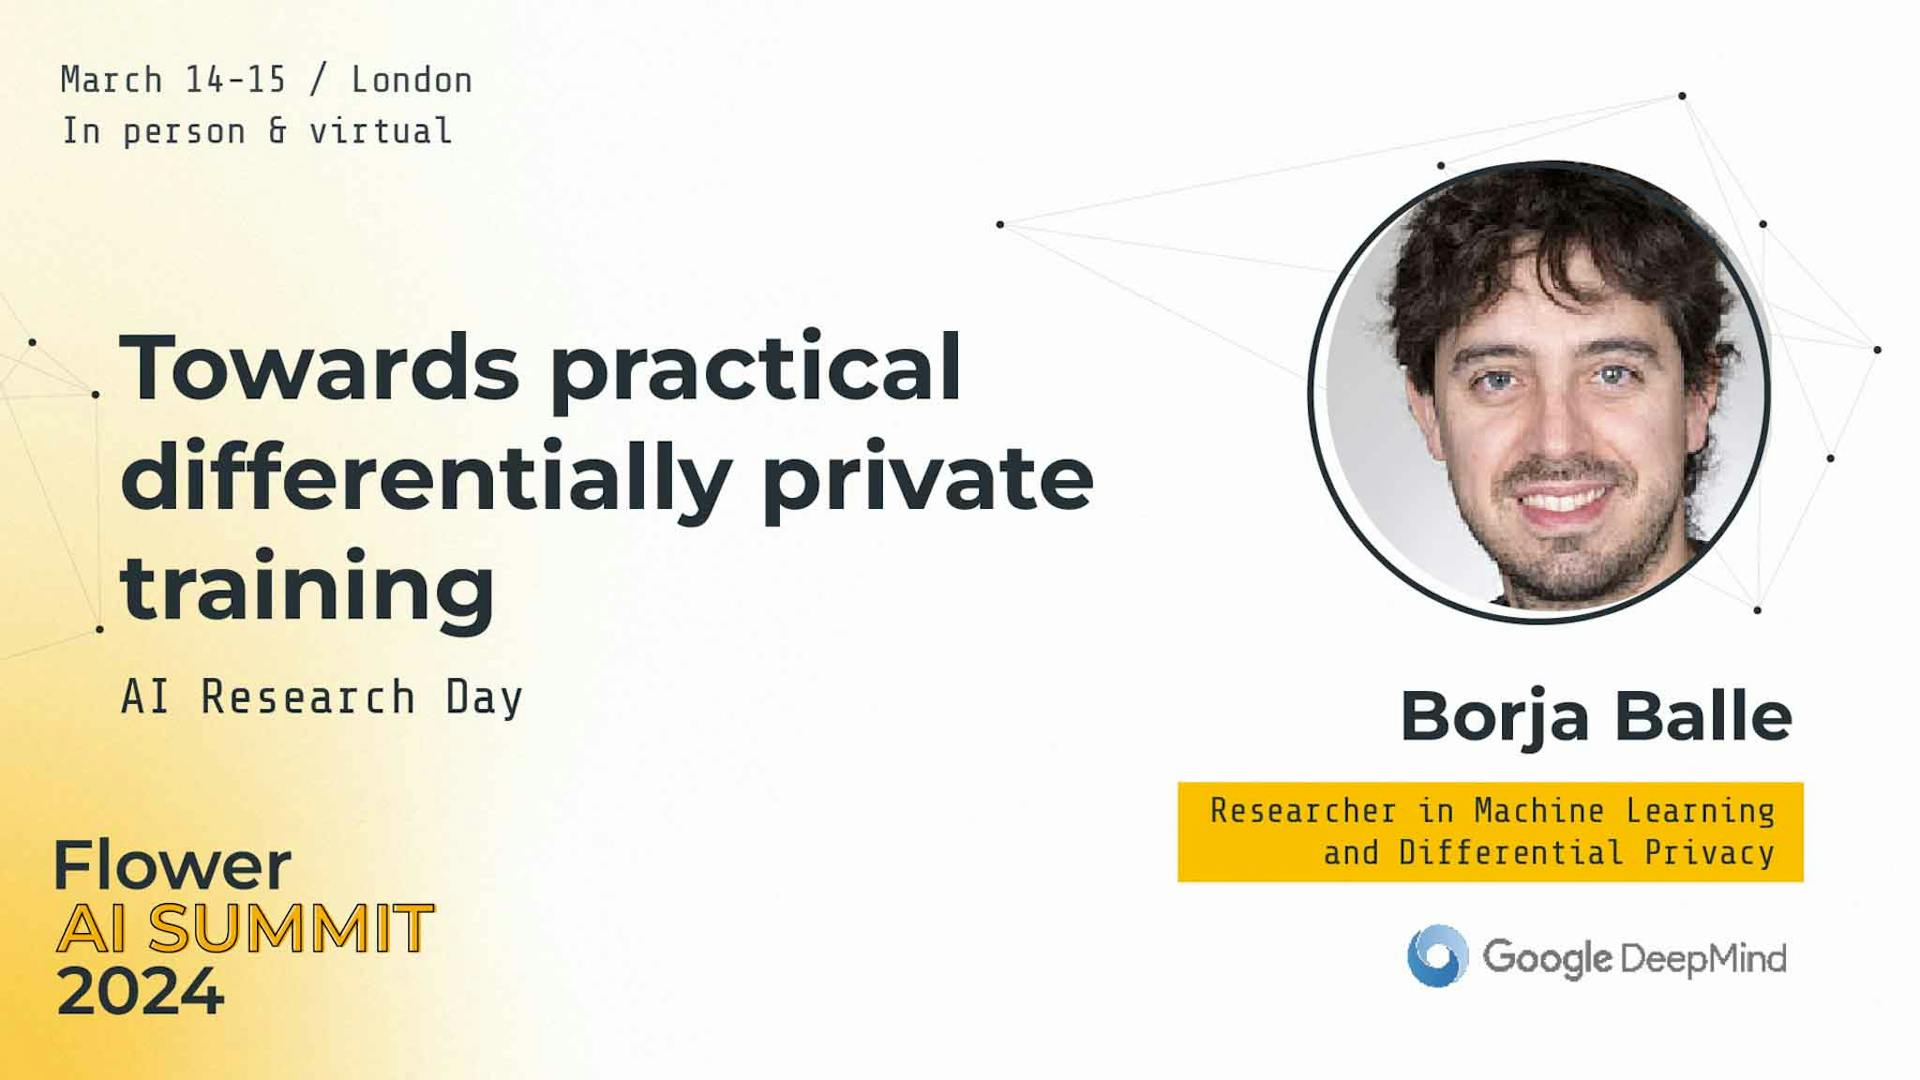 Towards practical differentially private training, Borja Balle